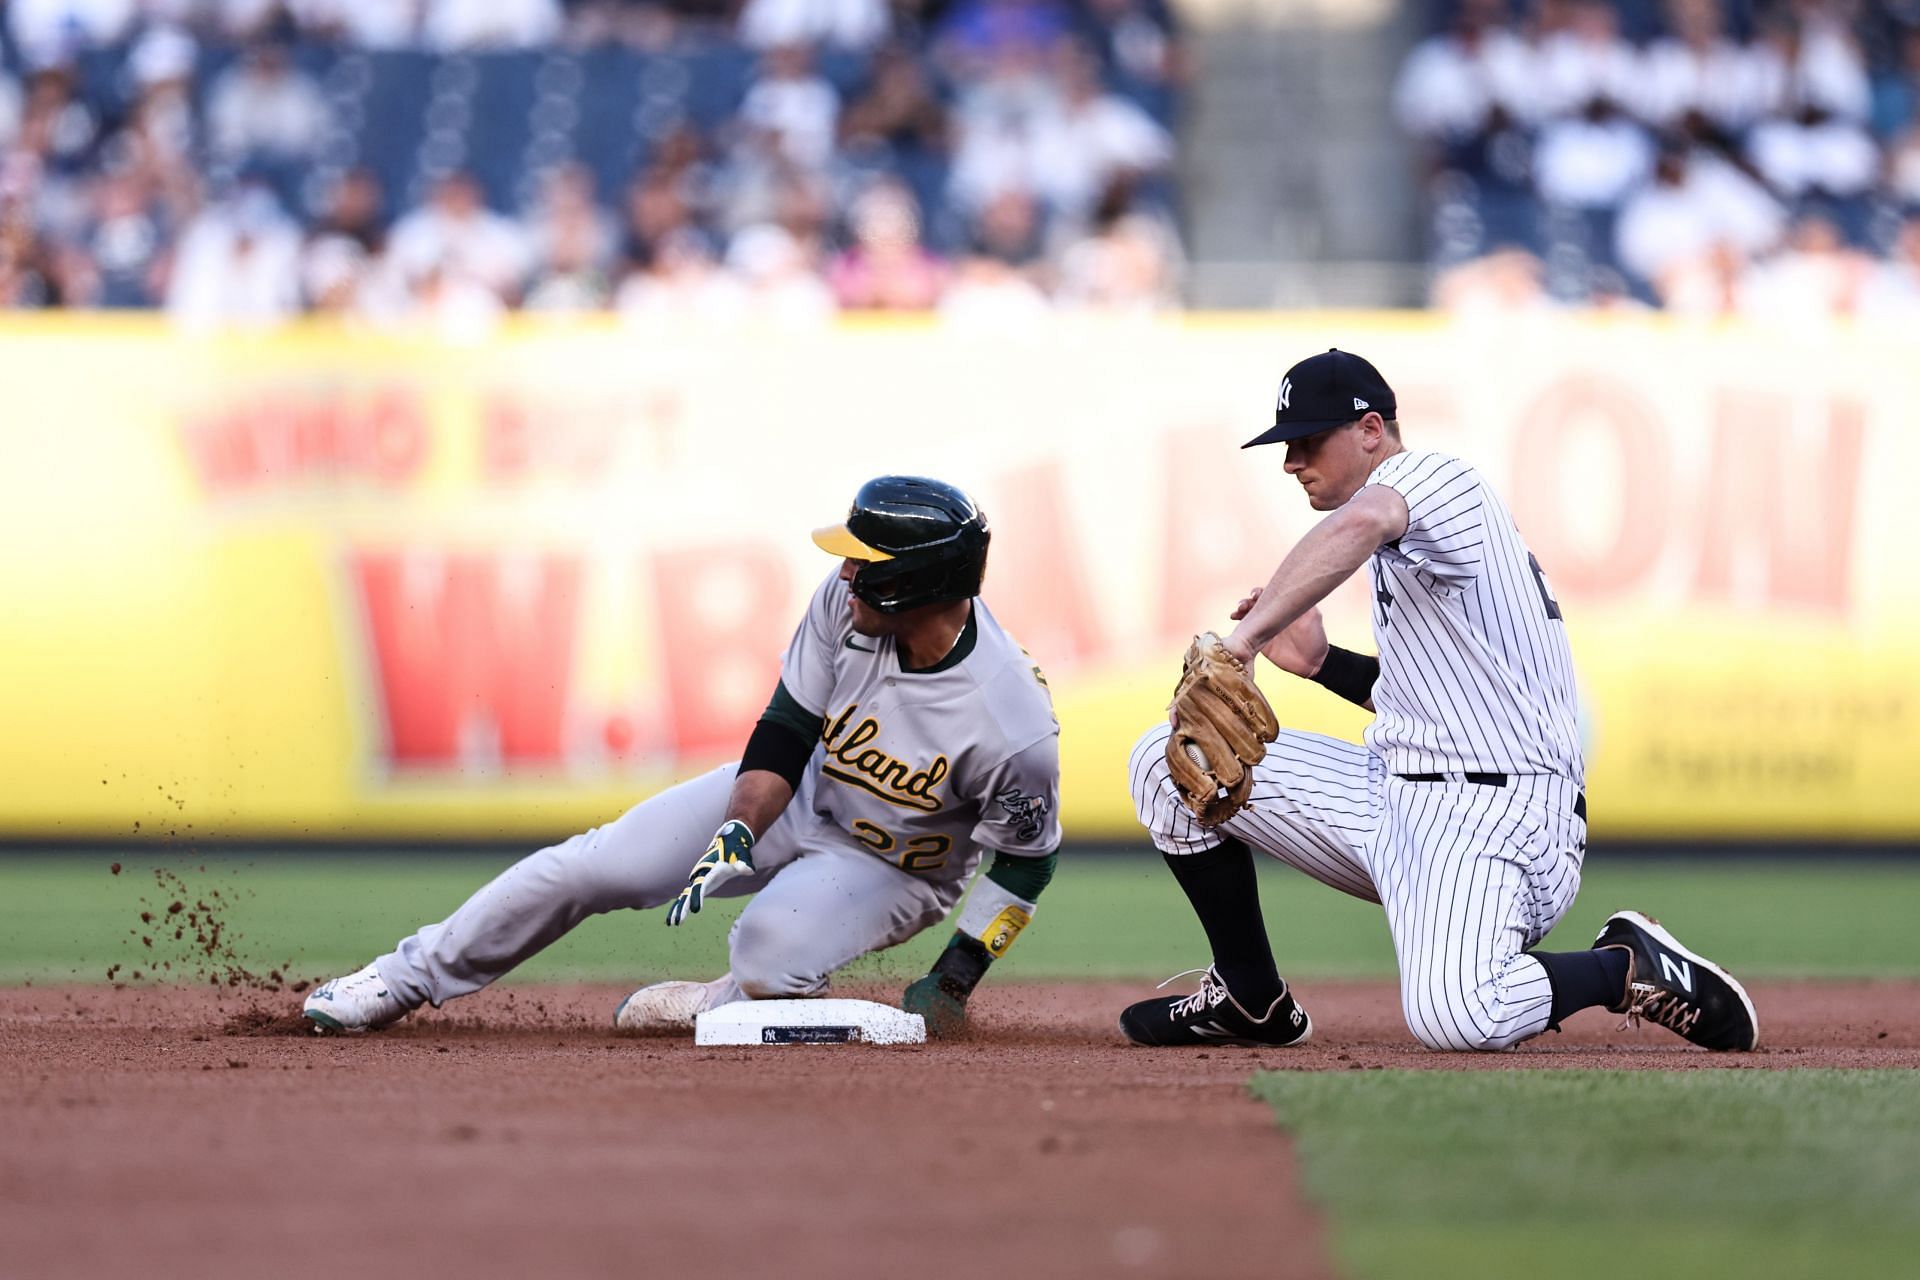 New York Yankees infielder D.J. LeMahieu owns a 1.000 fielding percentage at first and second base this season.